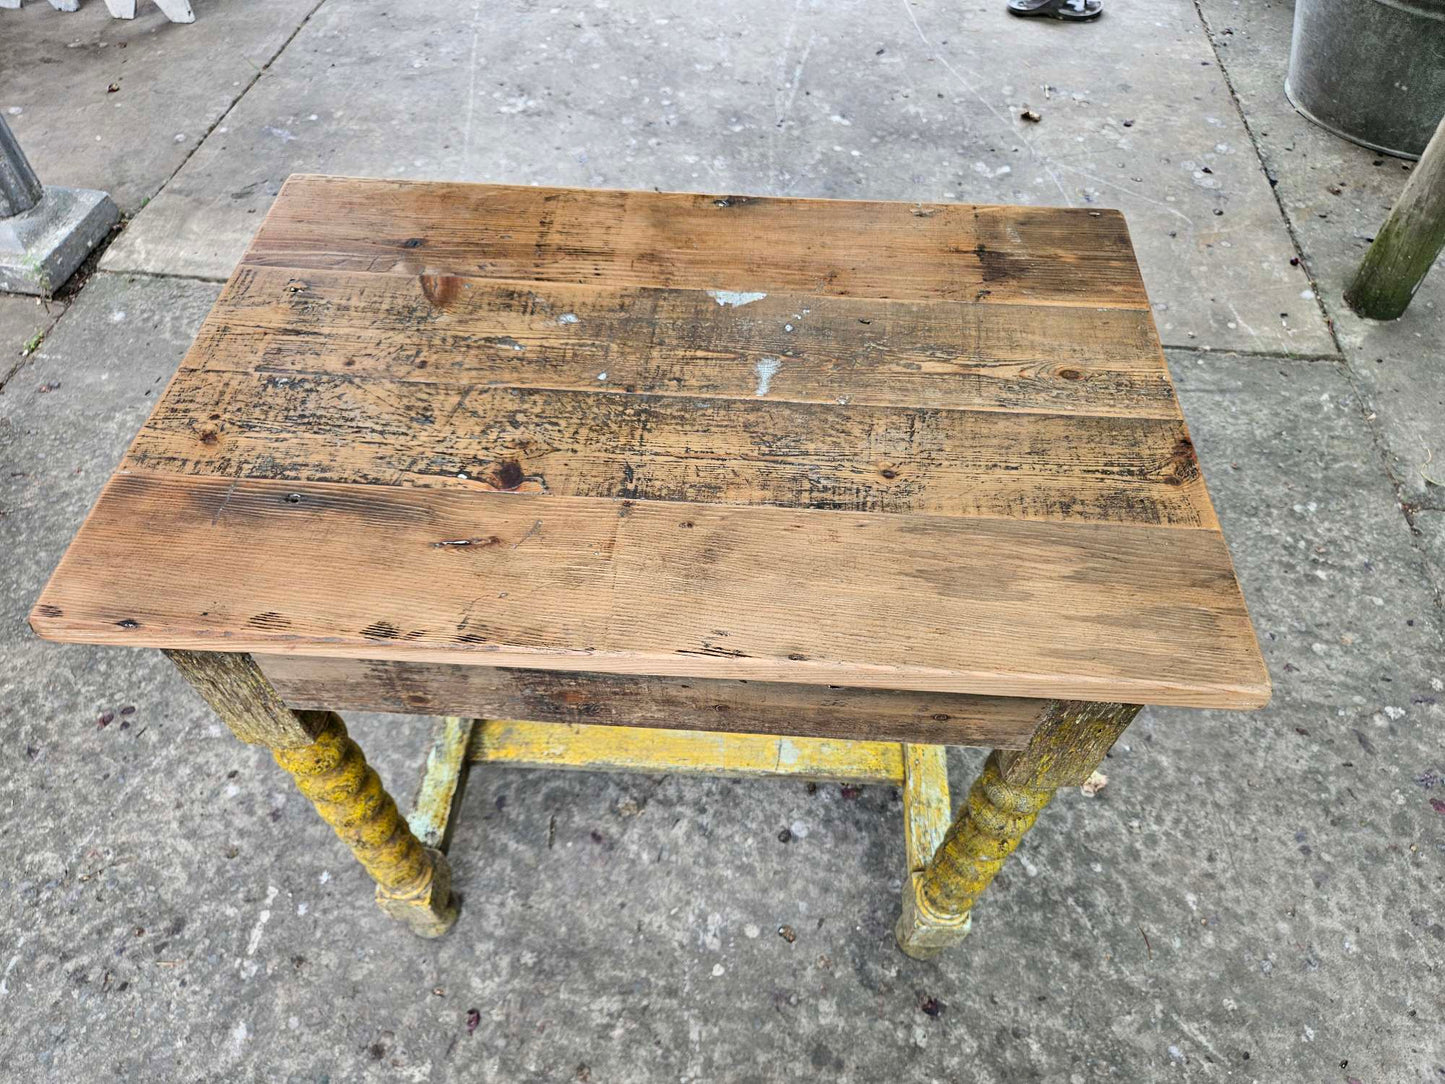 Yellow rustic table